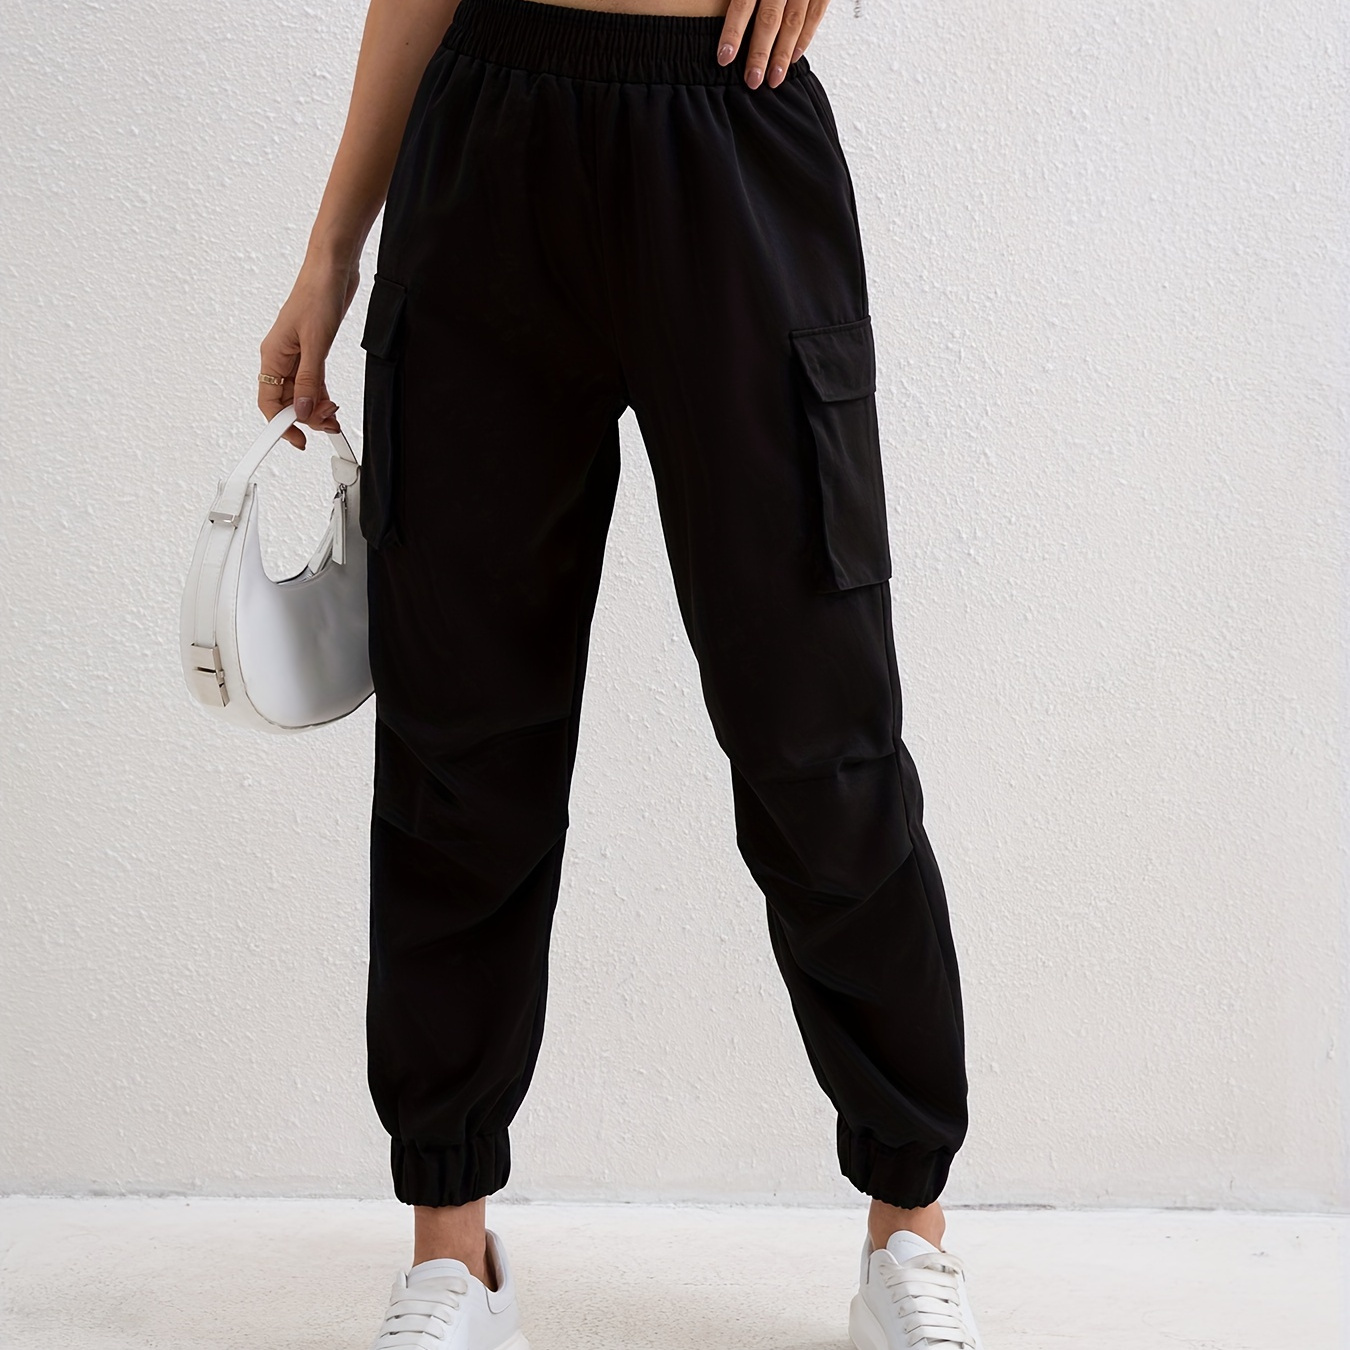 

Women's Elastic Waist Casual Cargo Joggers Pants With Pockets, Solid Color Pocket Running Overalls, Women's Athleisure